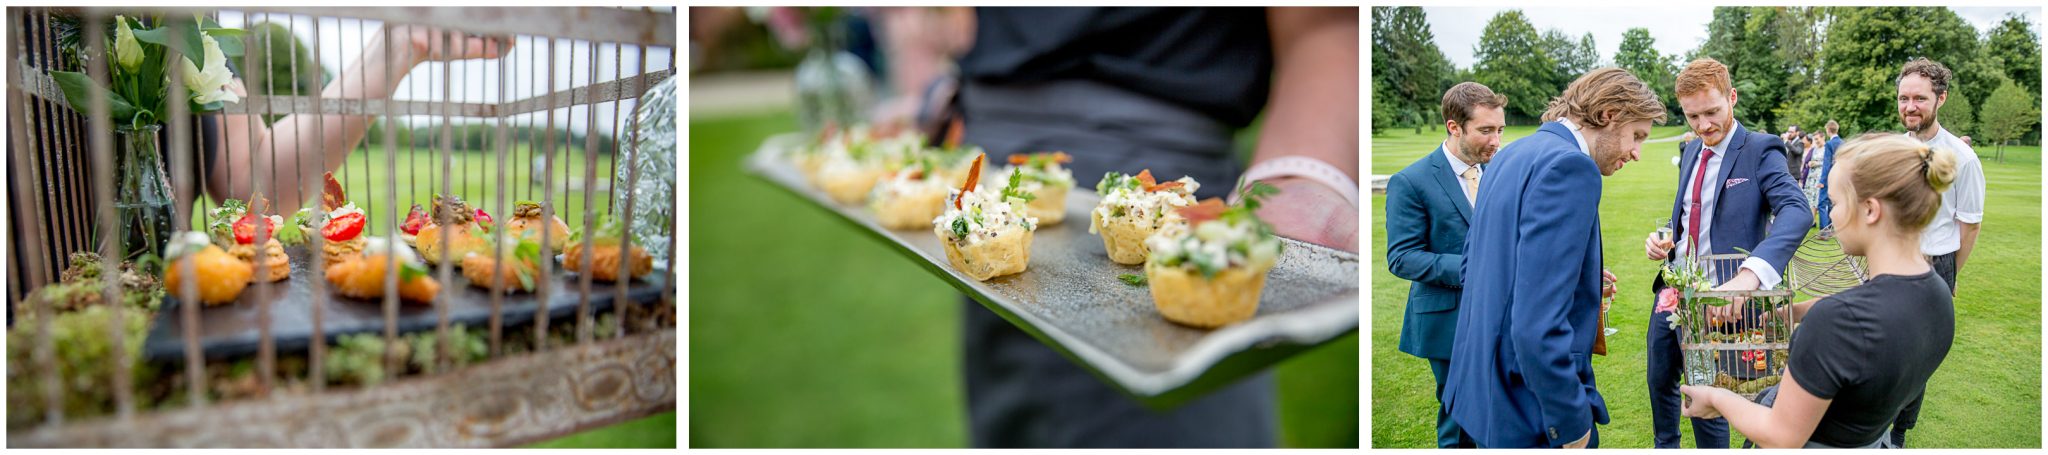 Canapes at ewdding reception prepared and served by Kalm Kitchen in Hampshire